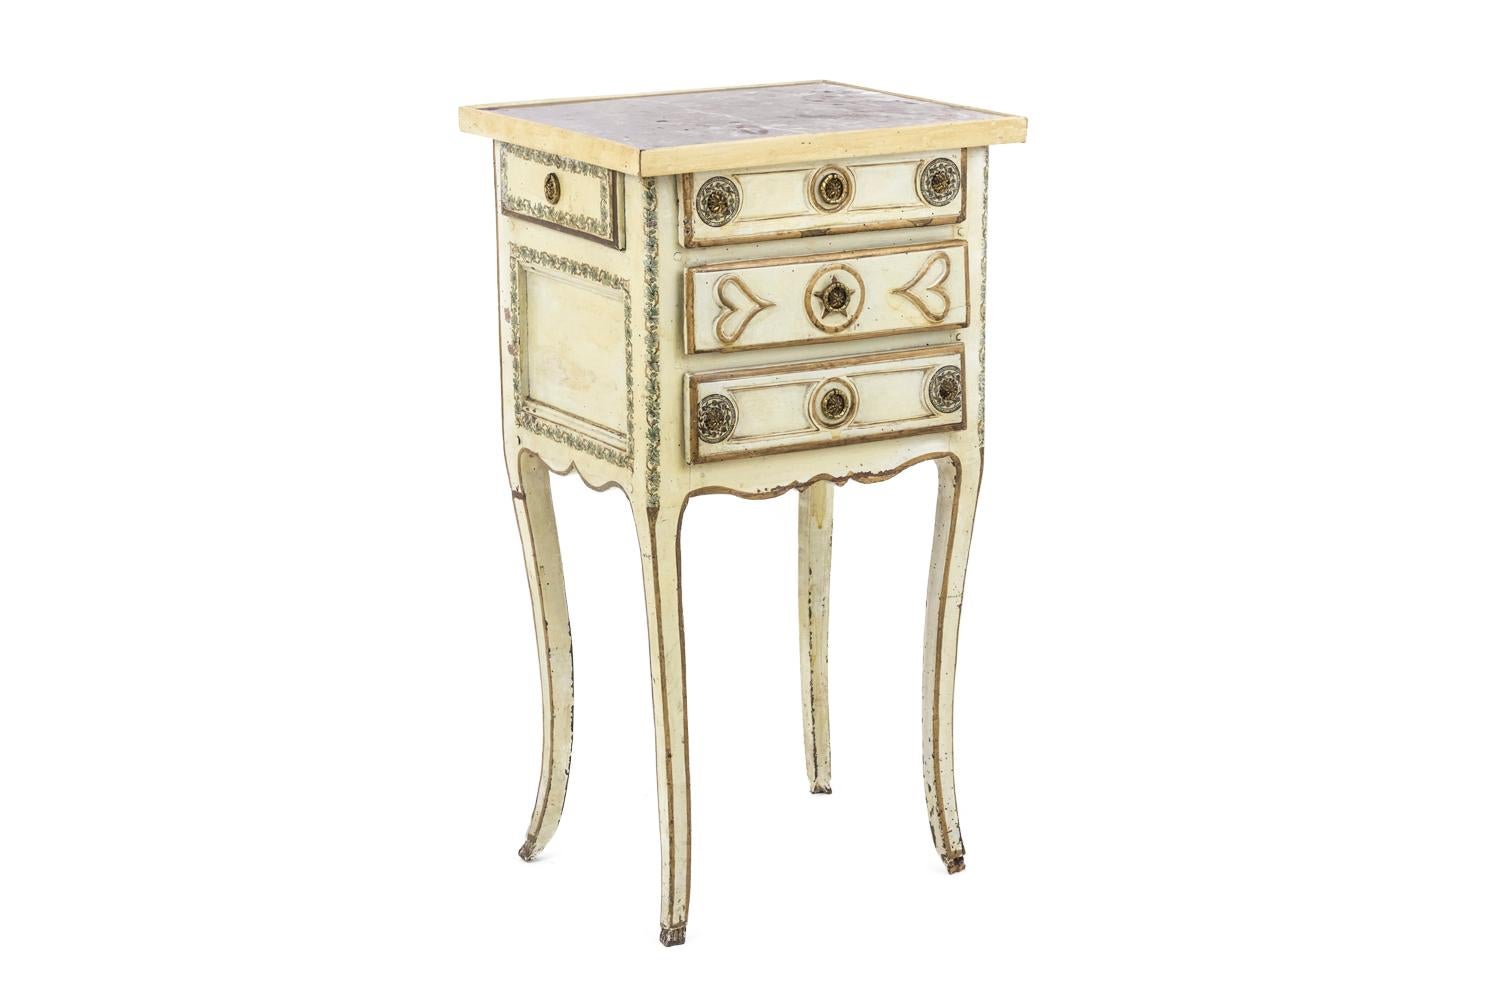 Bedside table in pale yellow lacquered wood standing on four cabriole legs.
Opening by three drawers on the front and a drawer on the right side. Carved decor of hearts and circles on drawers completed by a grey-brown painted decor of small flowers